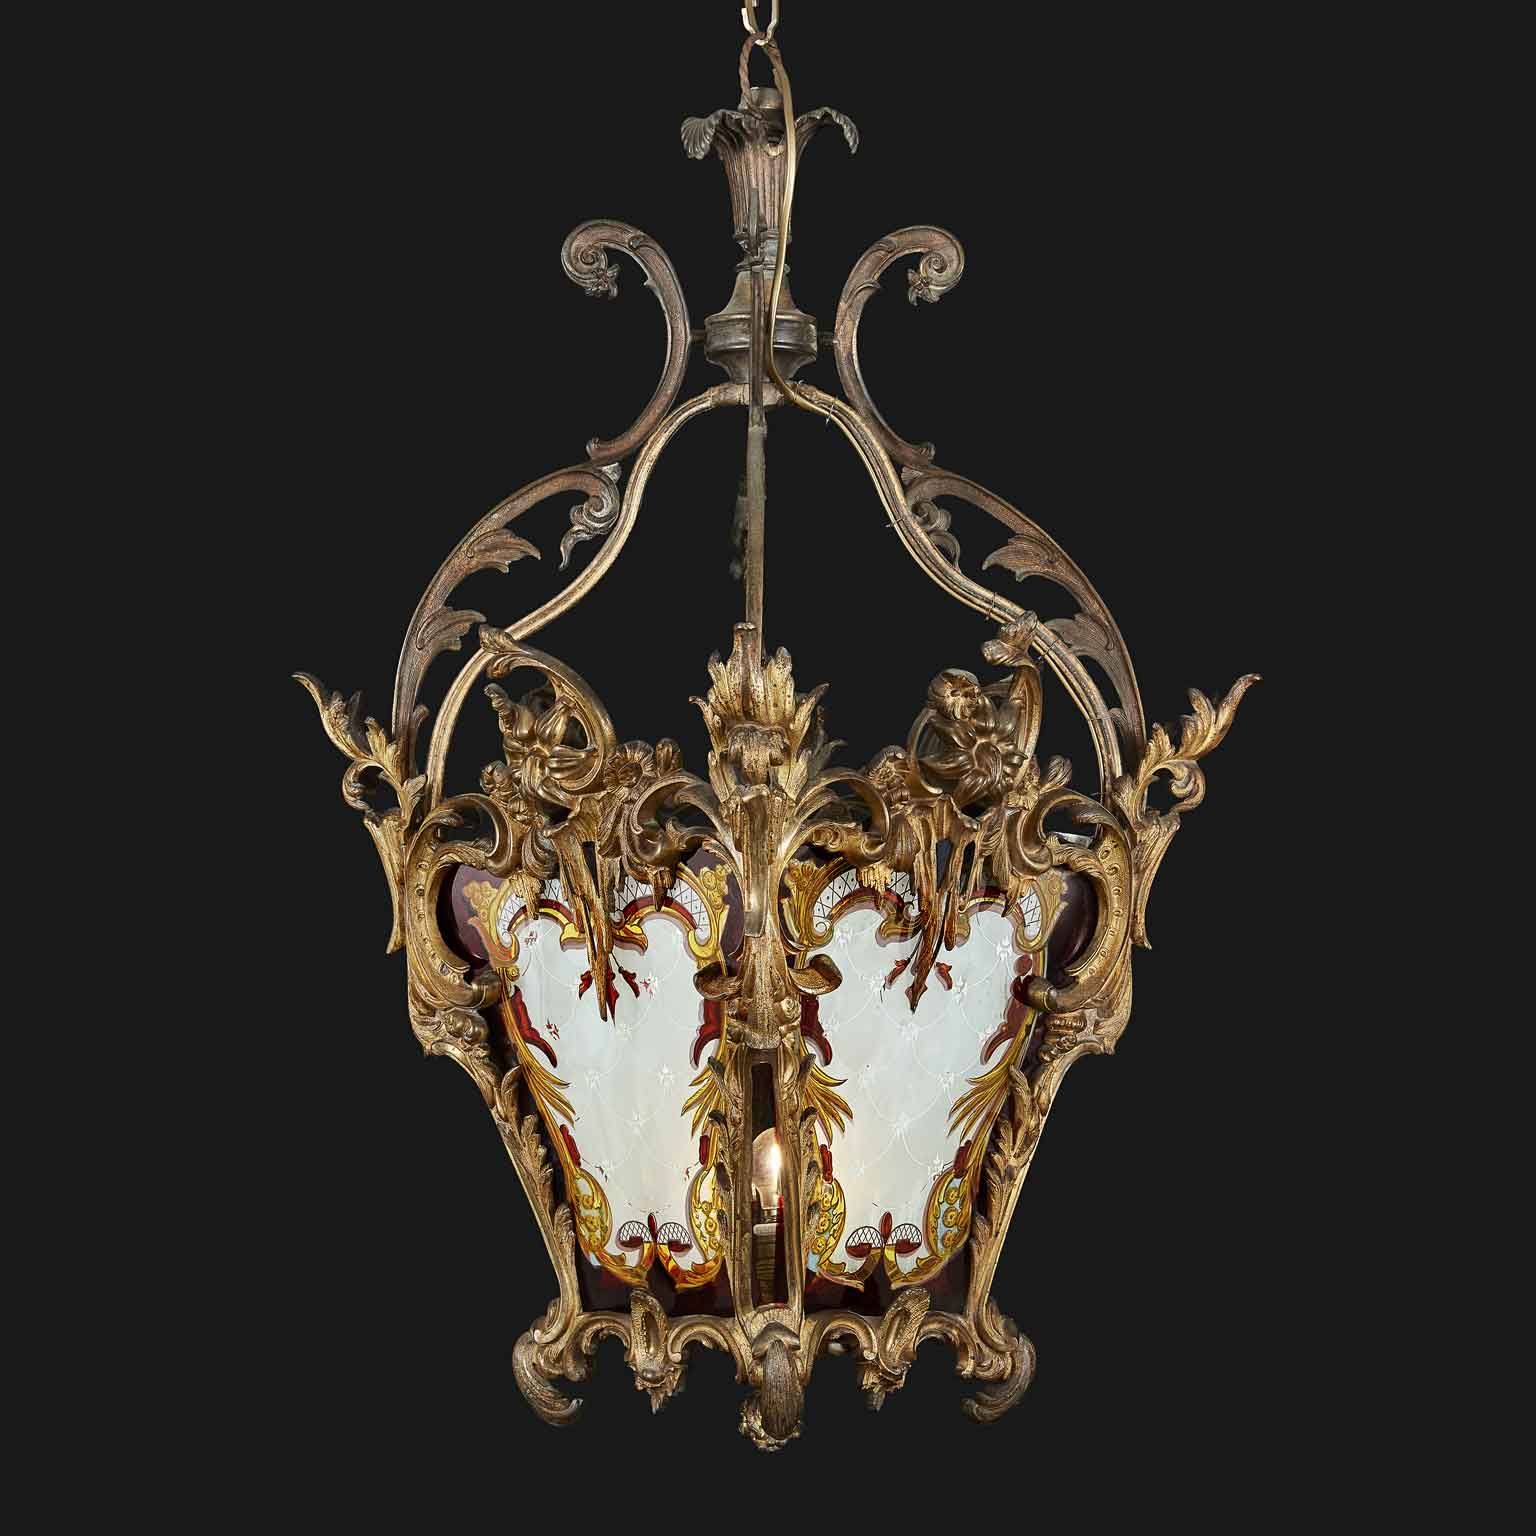 19th Century Italian Gilt Bronze Rocaille Style Lantern With Lambrequin  Decorated Glasses With Regard To Antique Gild Lantern Chandeliers (View 4 of 15)